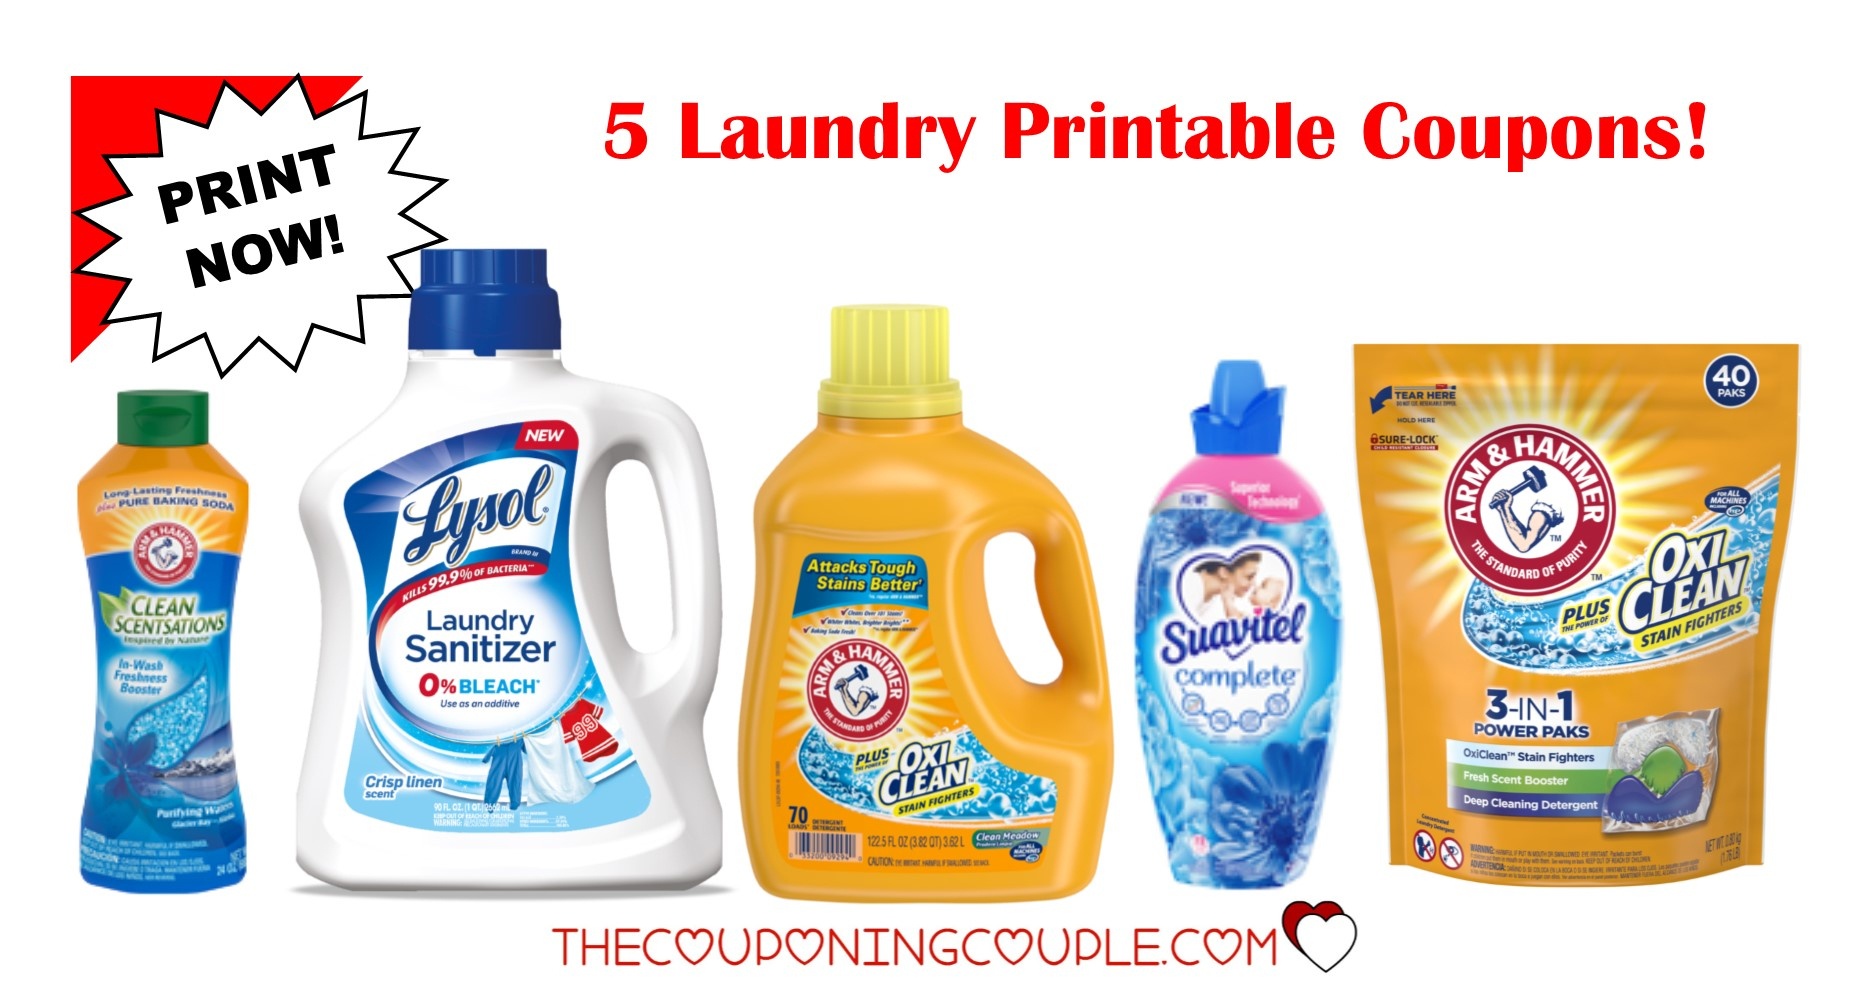 5 Laundry Detergent Printable Coupons ~ $5.50 In Savings!!! - Free All Detergent Printable Coupons